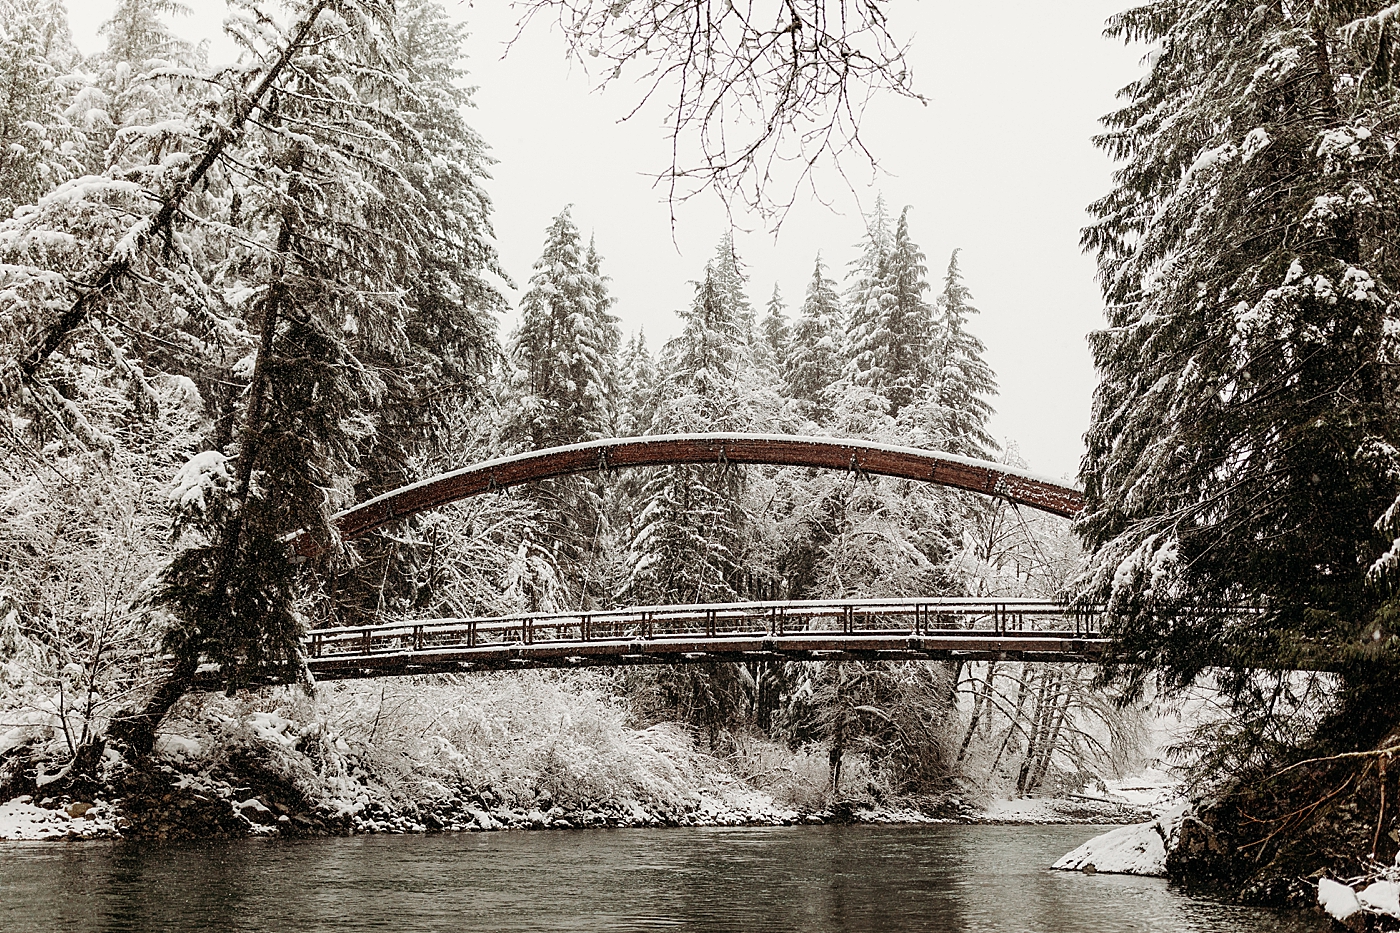 Middle Fork bridge in the winter with snow. Photo by Megan Montalvo Photography.